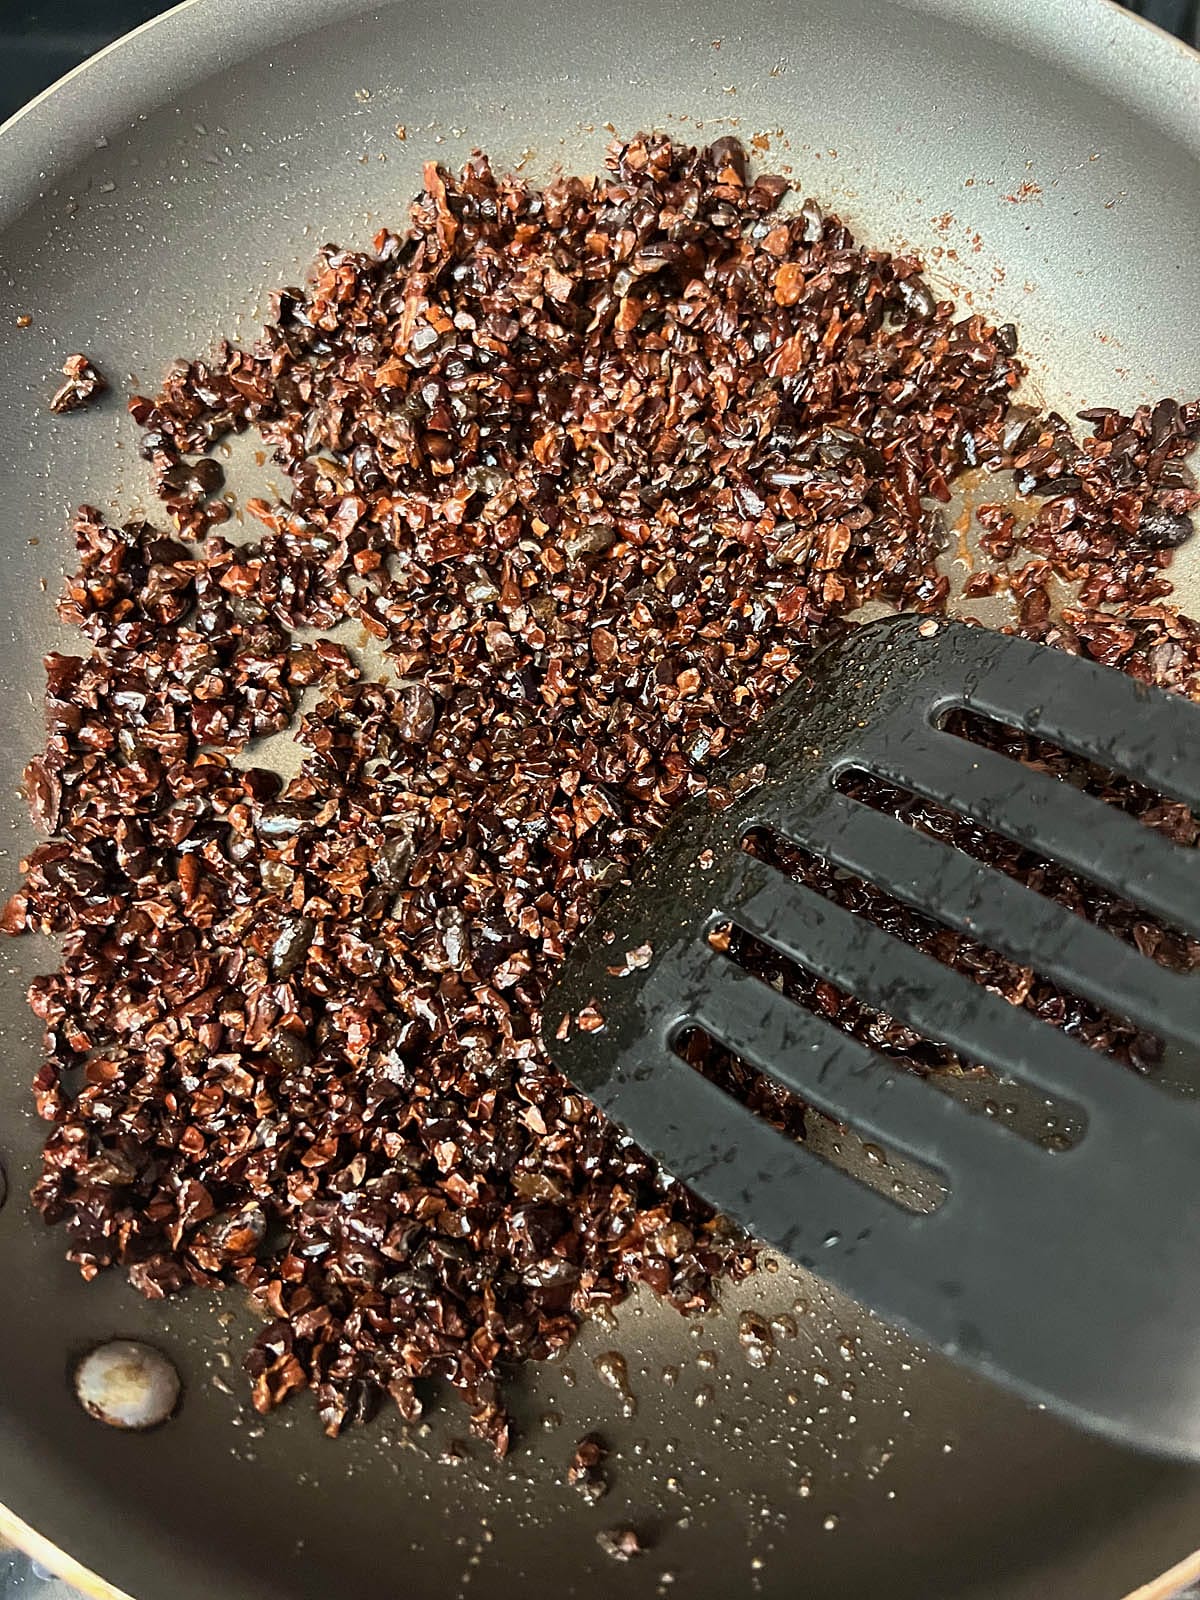 Cooked caramelized cacao nibs in a skillet with spatula.